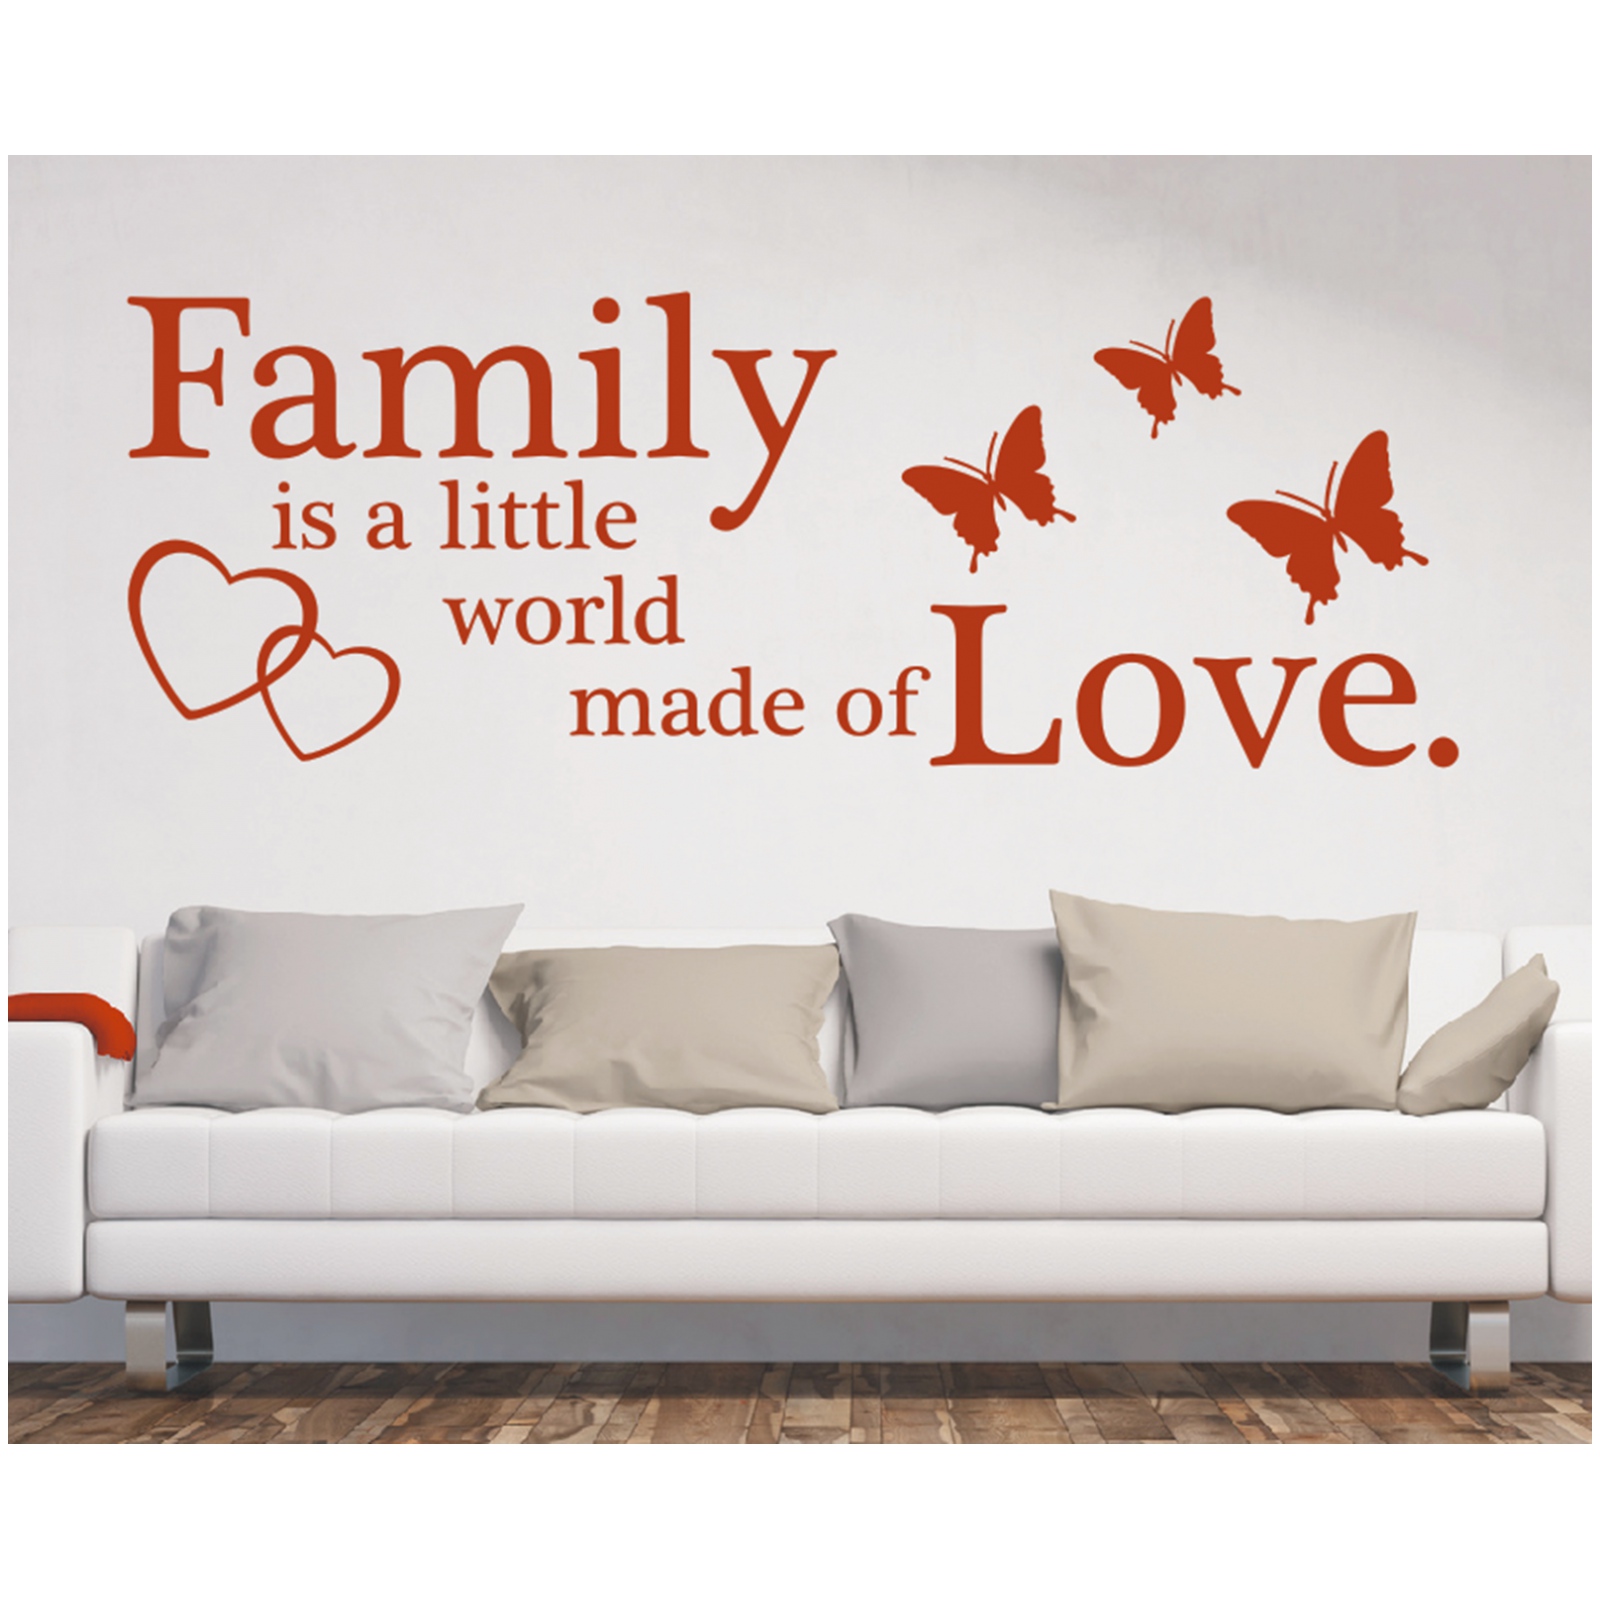 Wall Tattoo Saying Family is World Love Family Wall Decal Sticker Love 3